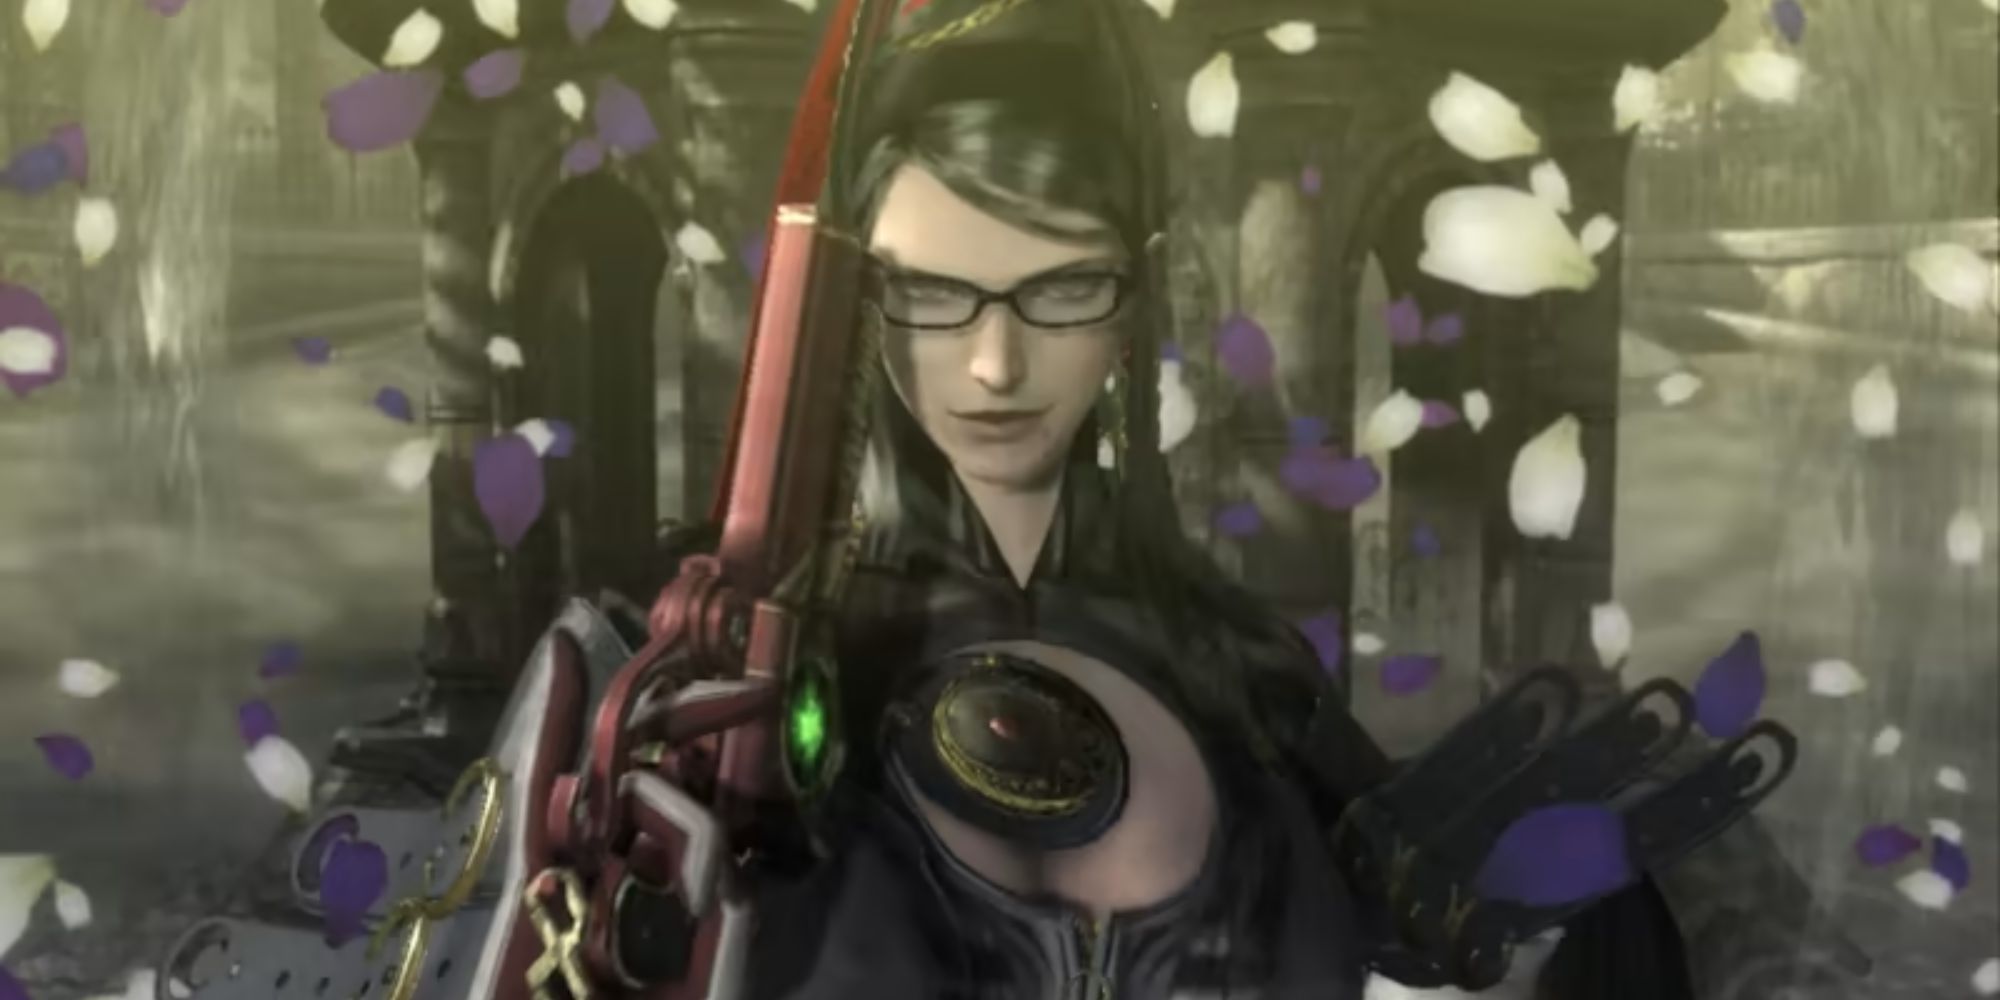 Bayonetta holds her gun against her head as blossoms fall around her